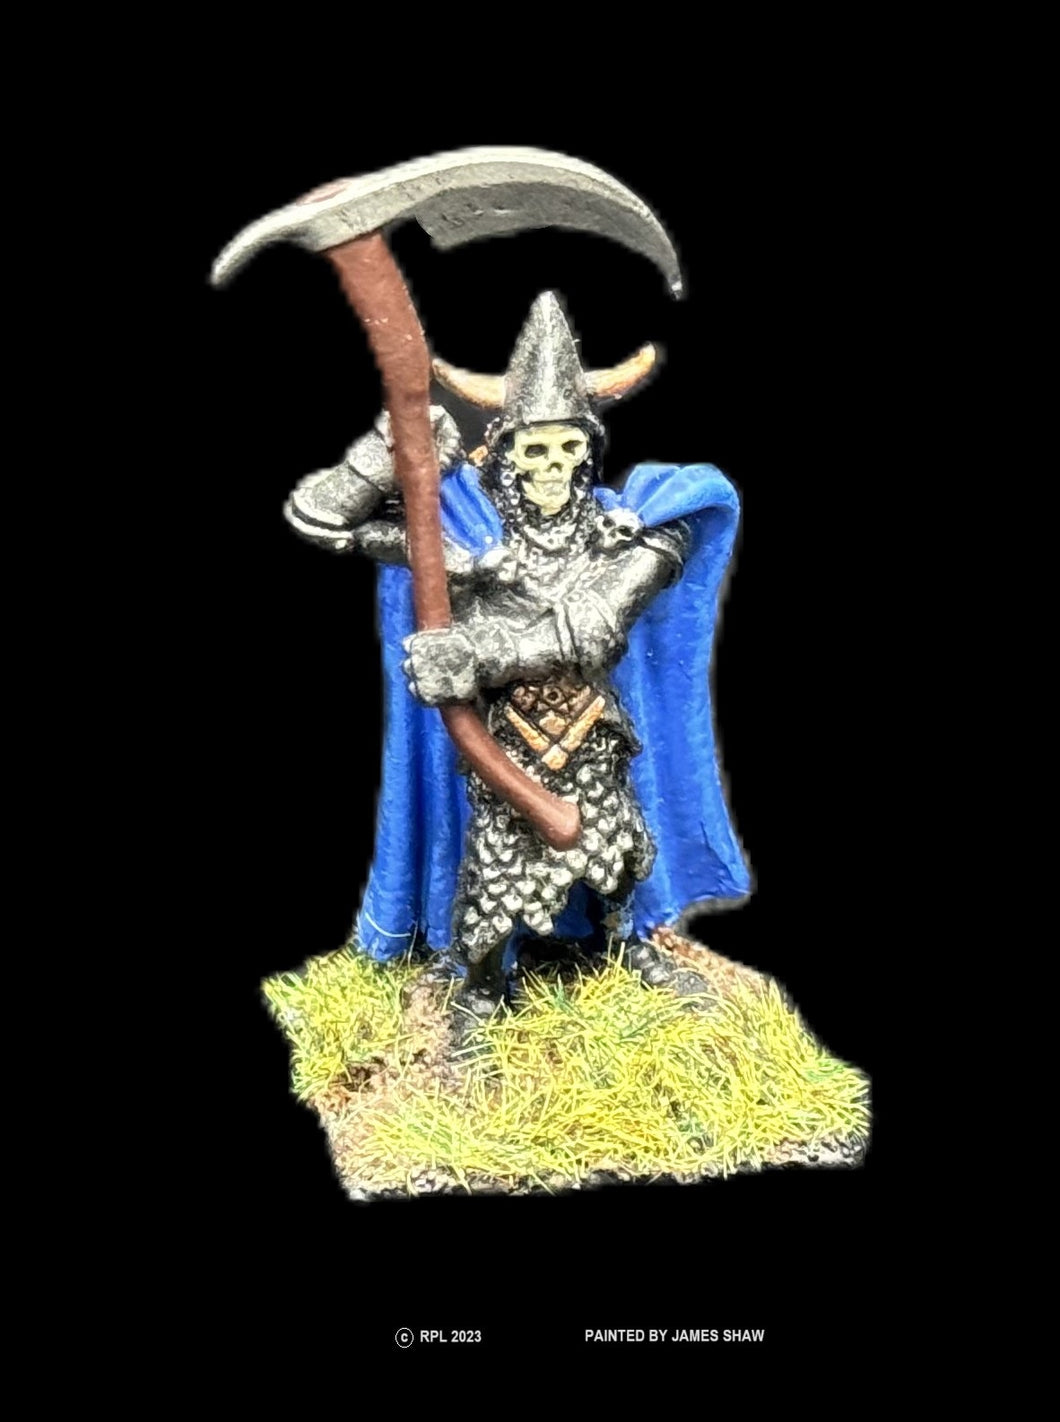 51-0473:  Wight with Scythe